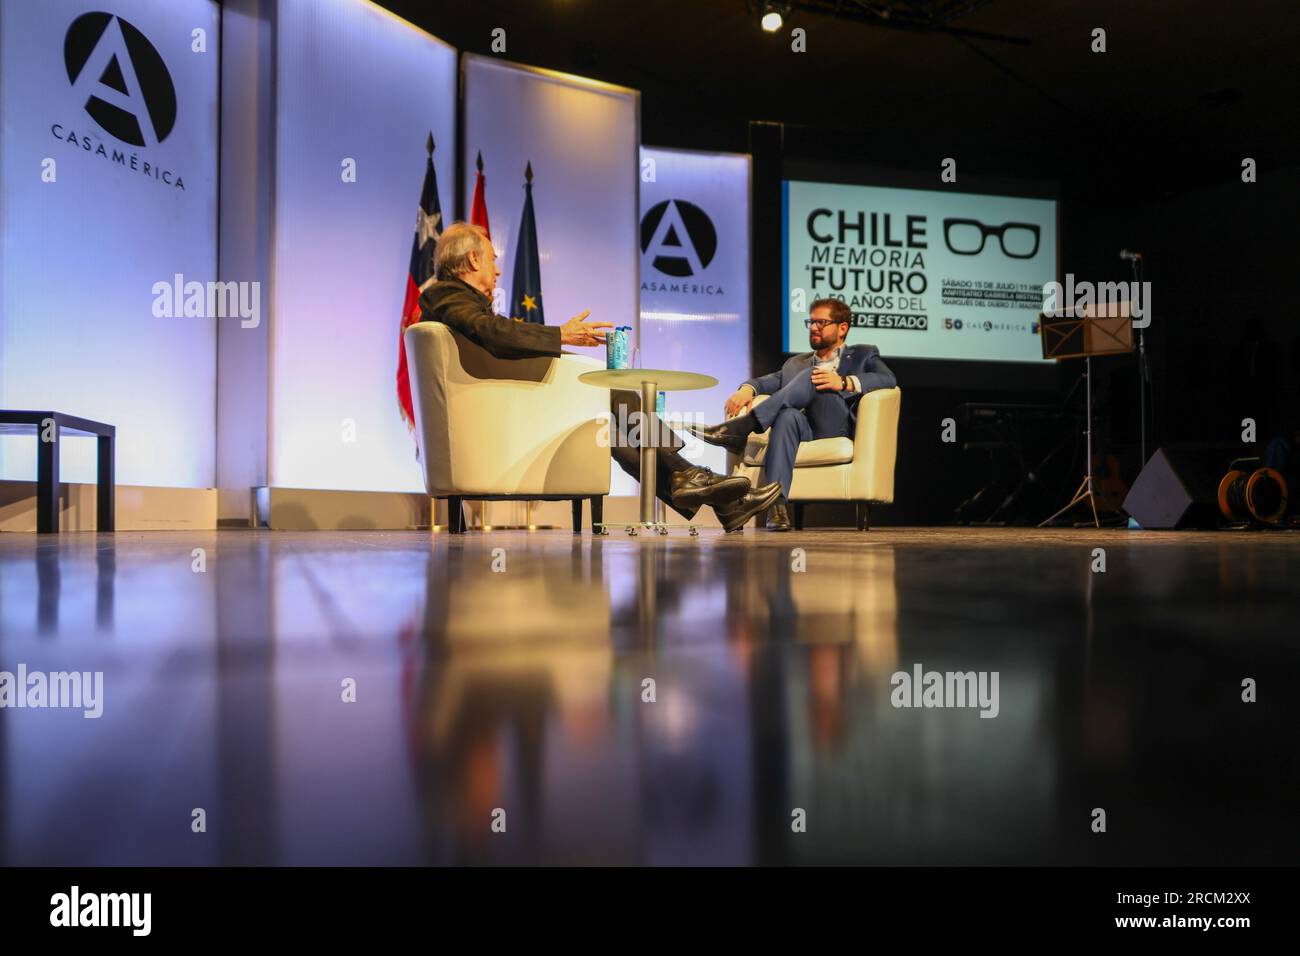 Madrid, Spain. 15th July, 2023. The President of the Republic of Chile, Gabriel Boric (R), talks with the Spanish singer-songwriter Joan Manuel Serrat (L) during the event. Taking advantage of the visit to Madrid of the President of the Republic of Chile. Gabriel Boric, Casa de América and the Chilean embassy in Madrid have organized an act in commemoration of the next 50th anniversary of the coup d'état in the South American country called: 'Memory and future 50 years after the coup d'état'. Coup led by General Augusto Pinochet against President Salvador Allende. Stock Photo